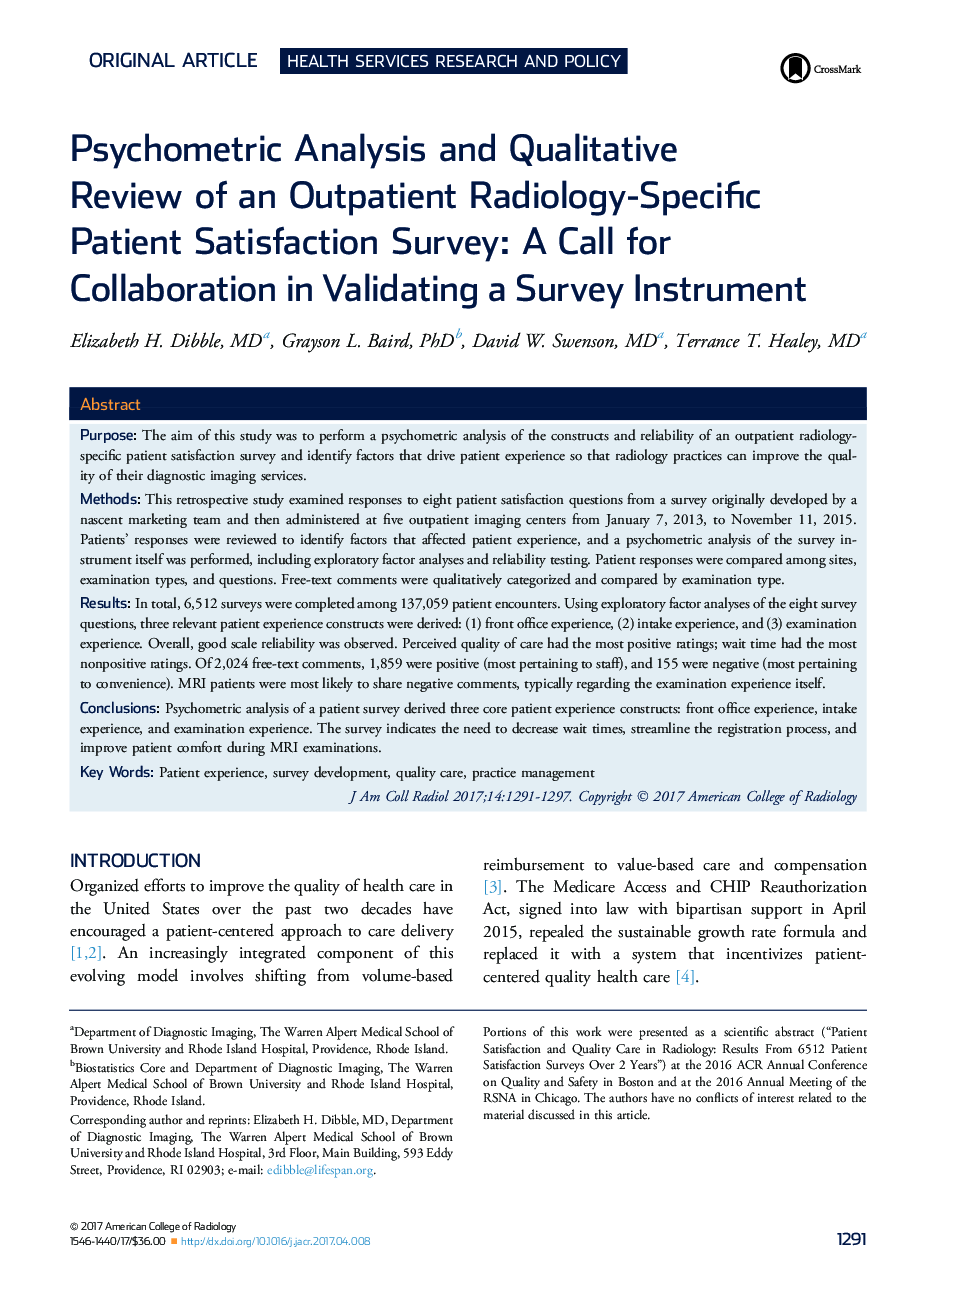 Psychometric Analysis and Qualitative ReviewÂ of an Outpatient Radiology-Specific Patient Satisfaction Survey: A Call for Collaboration in Validating a Survey Instrument